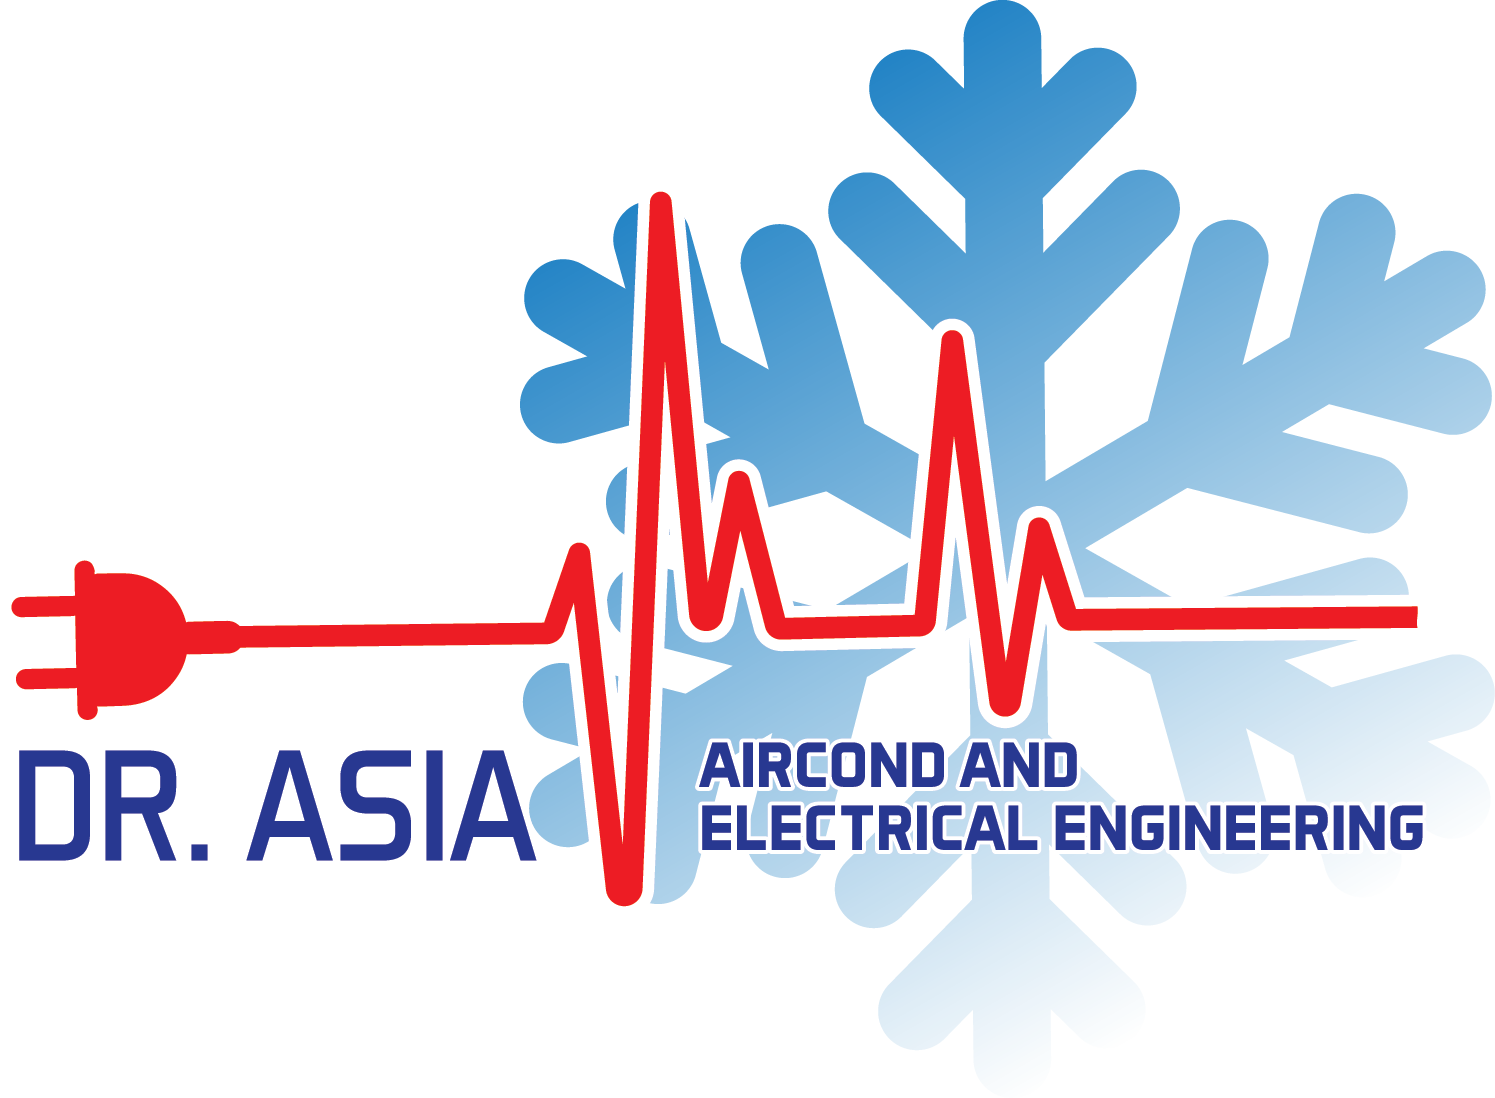 DR ASIA AIRCOND